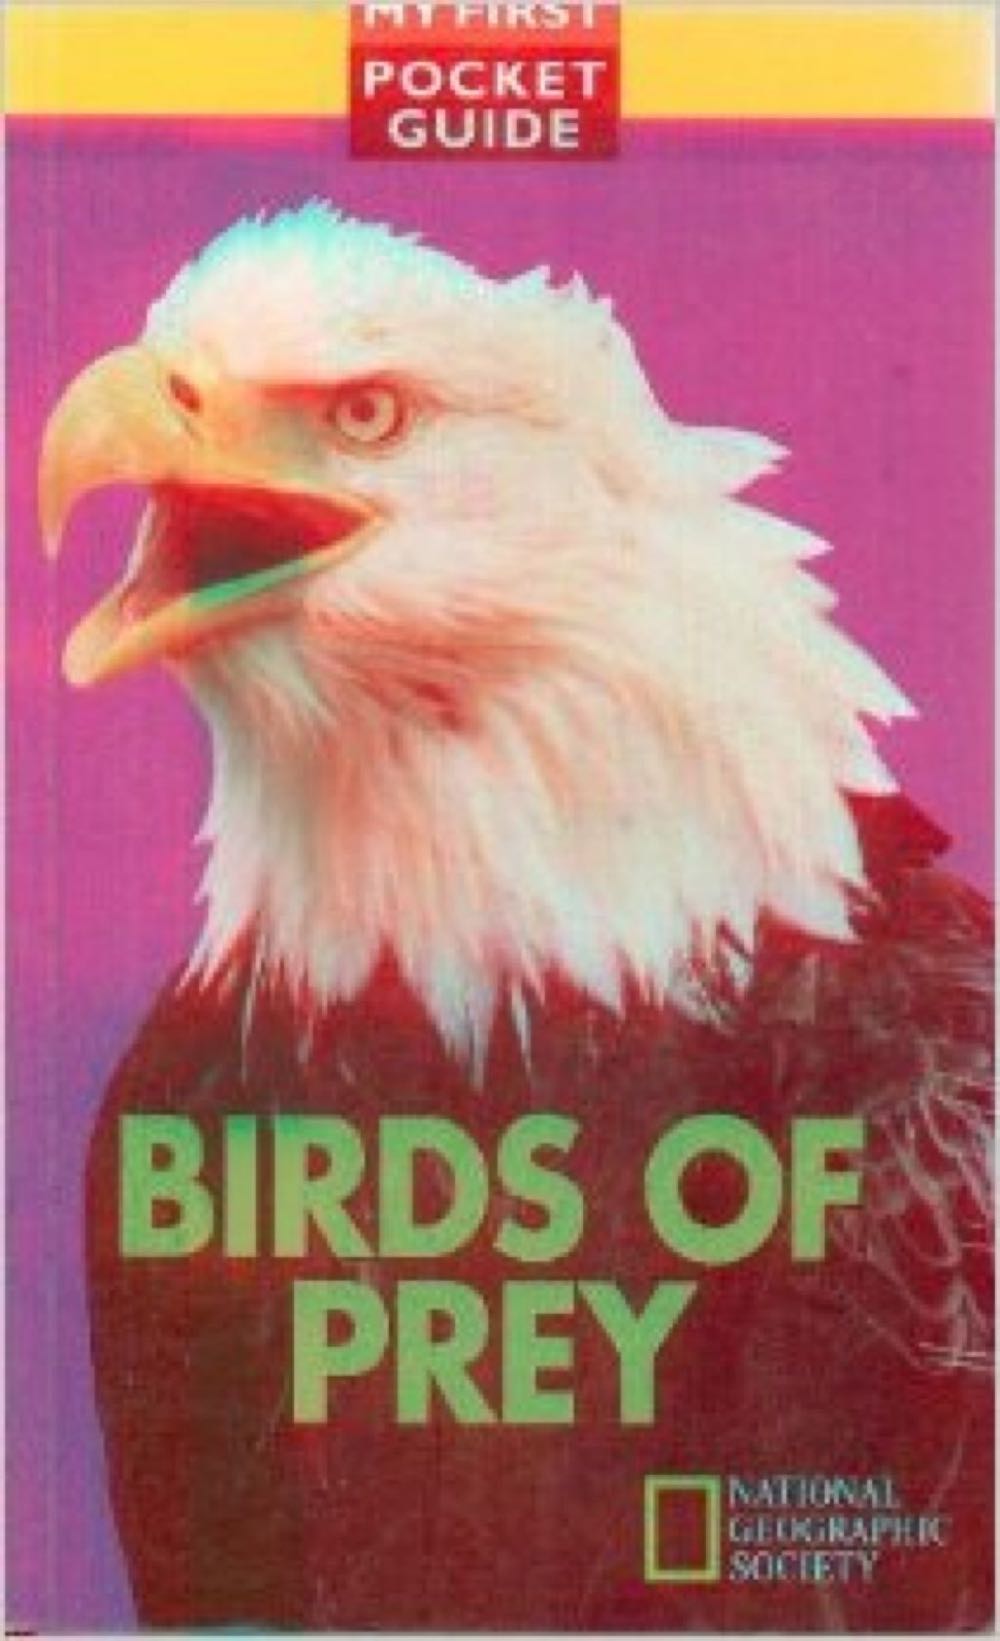 Birds of Prey - Amy Donovan (National Geographic Society - Paperback) book collectible [Barcode 9780792234548] - Main Image 1